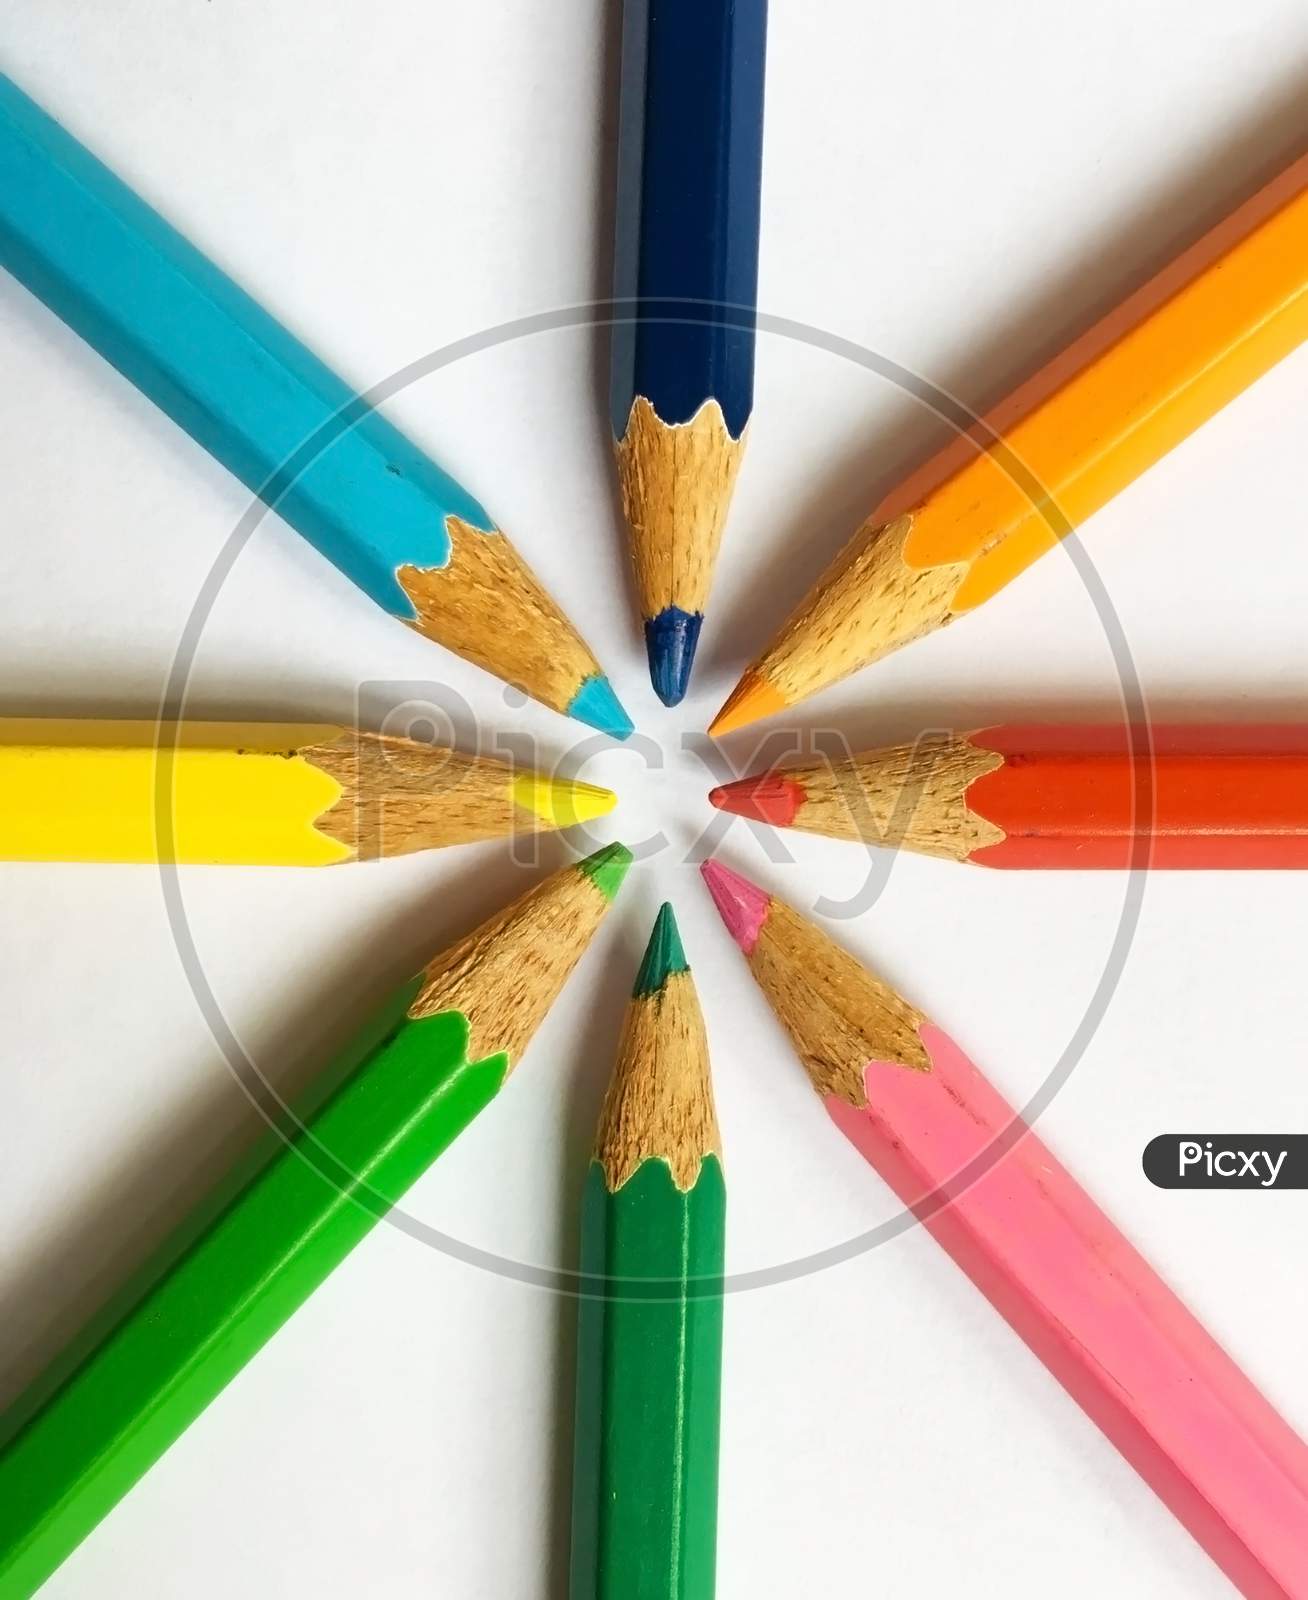 Colored wooden pencils on white background in a circular manner